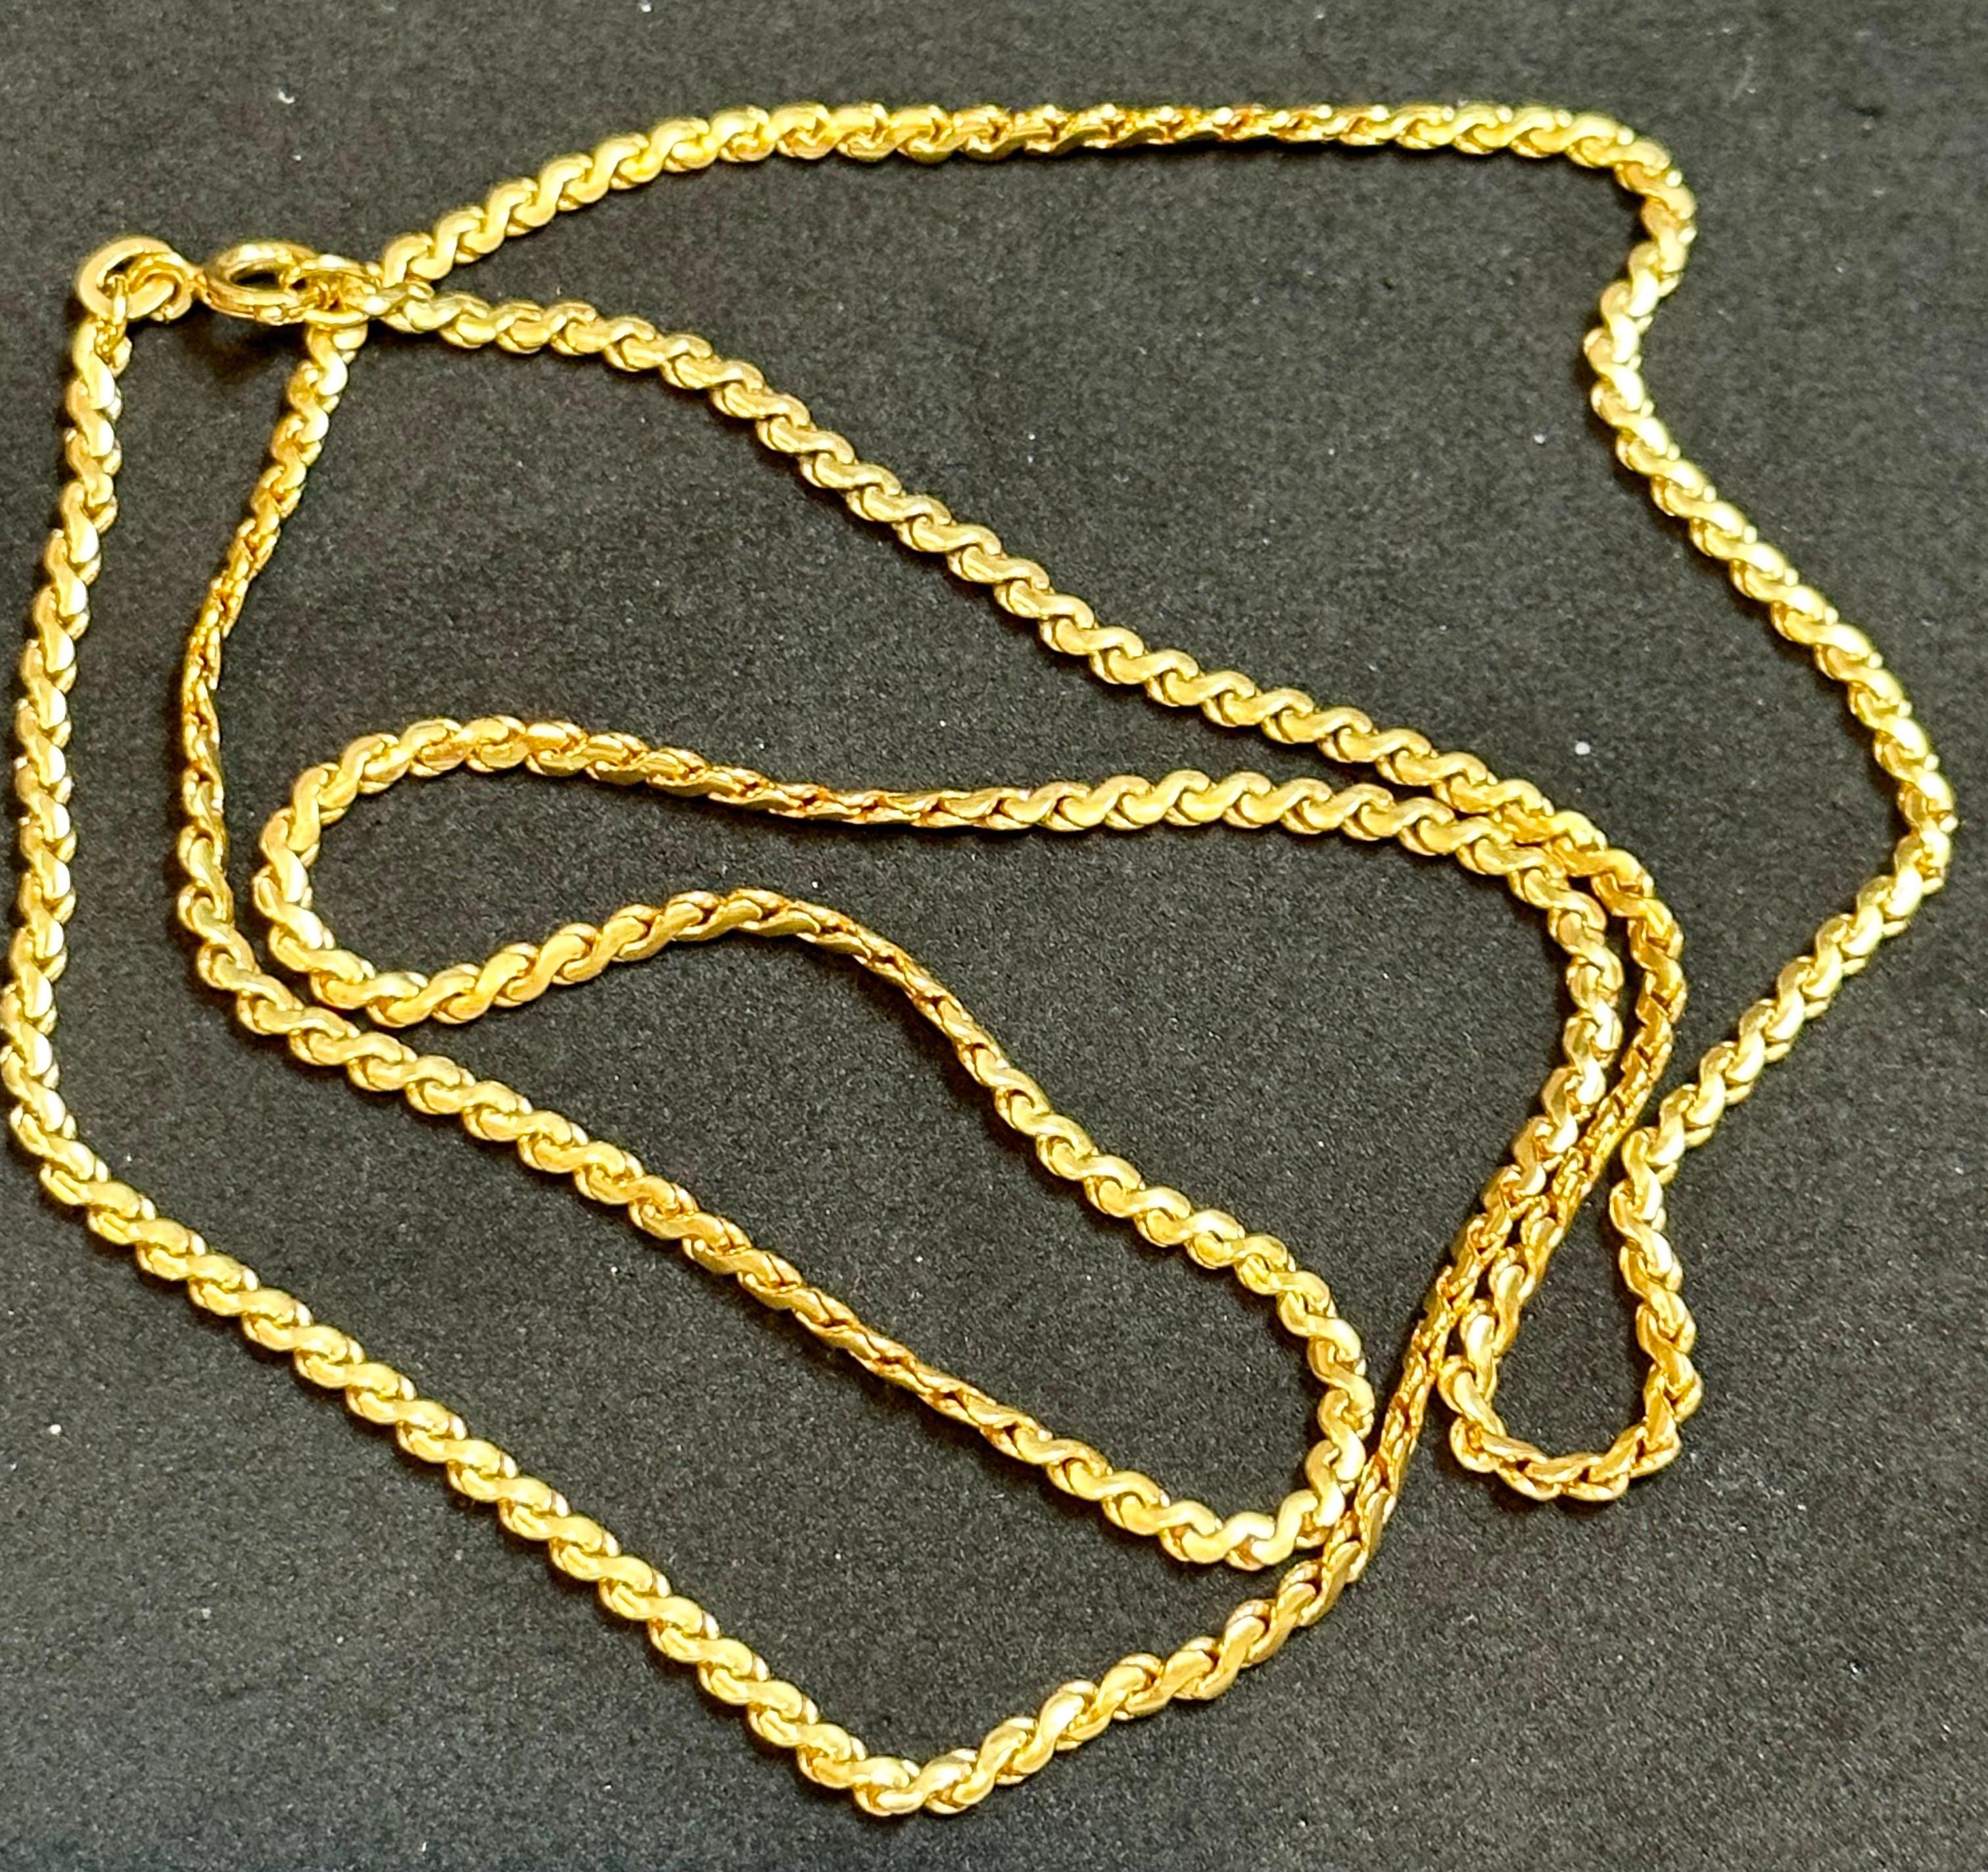 Vintage 18 Karat Yellow Gold 9.6  Gm S link  Chain Necklace, 24  Inch Long
1.22 MM wide
24 Inches long Necklace

Weight of the Necklace is 9.6 Grams 

Please look at all the pictures
Its very hard to capture the true color and luster of the Necklace